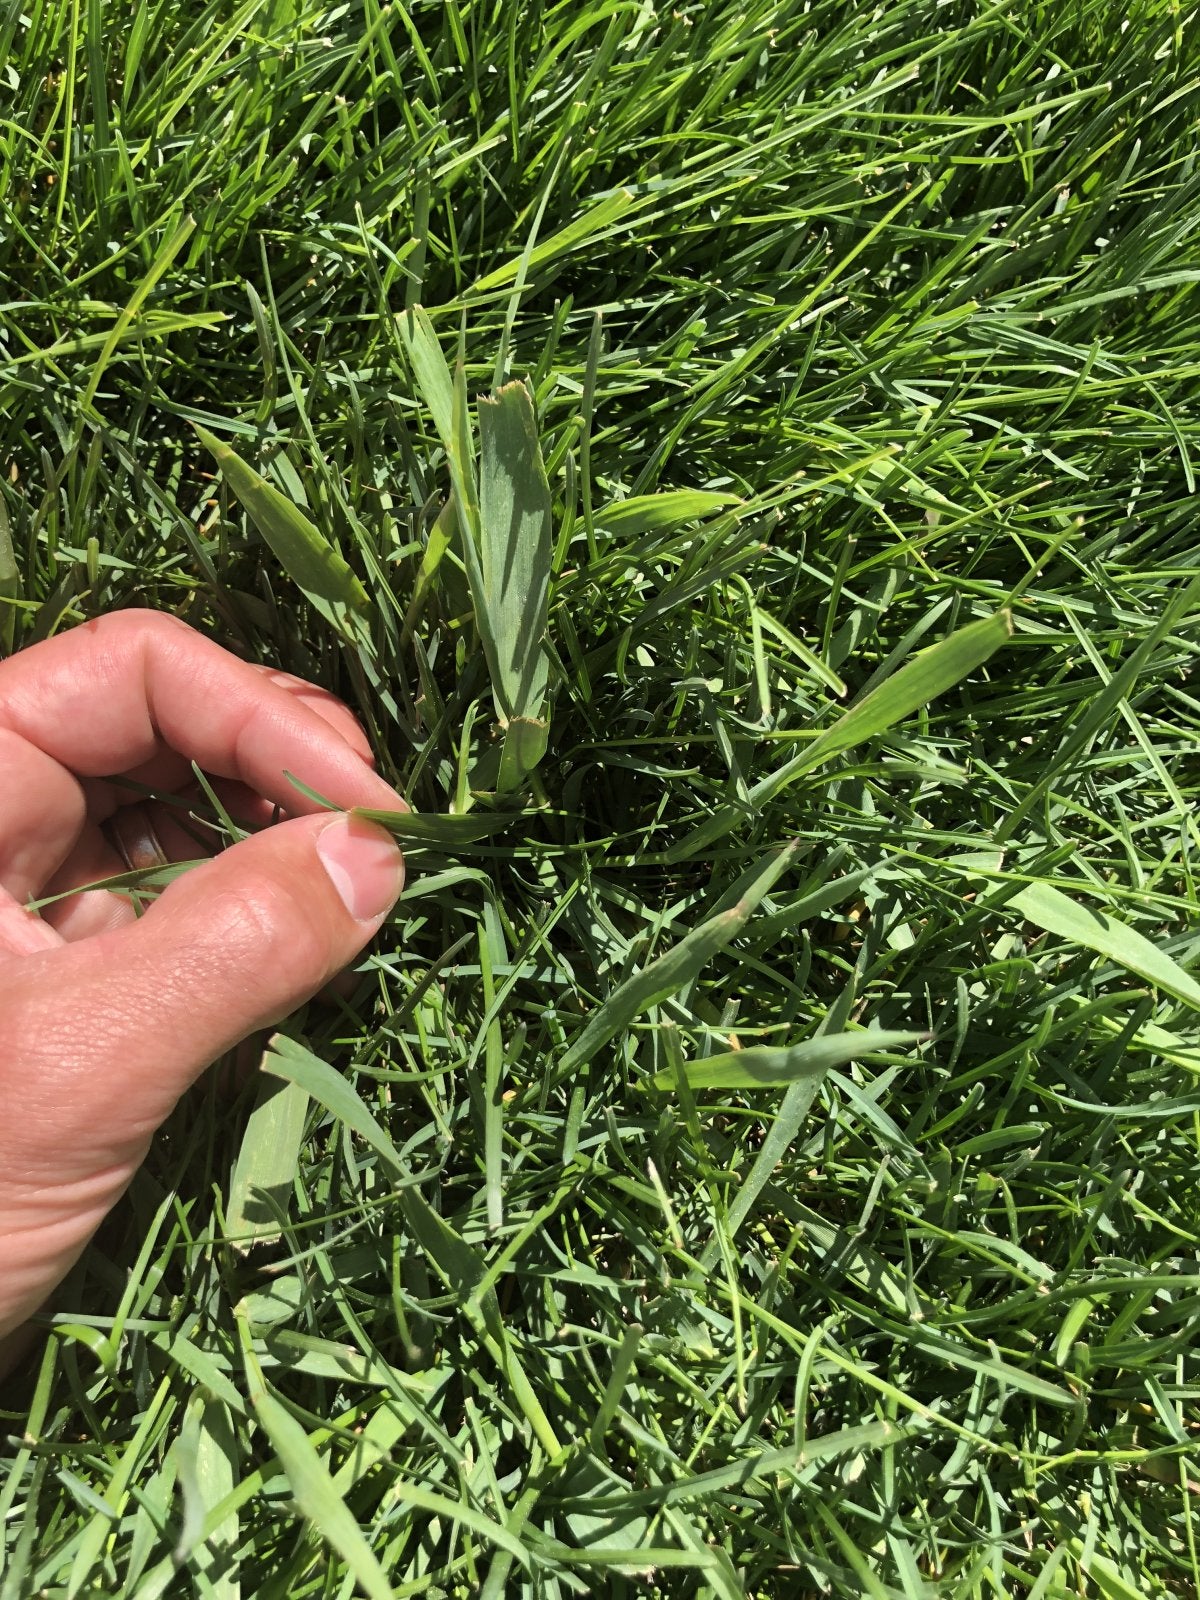 Grassy weed identification help! | Lawn Care Forum